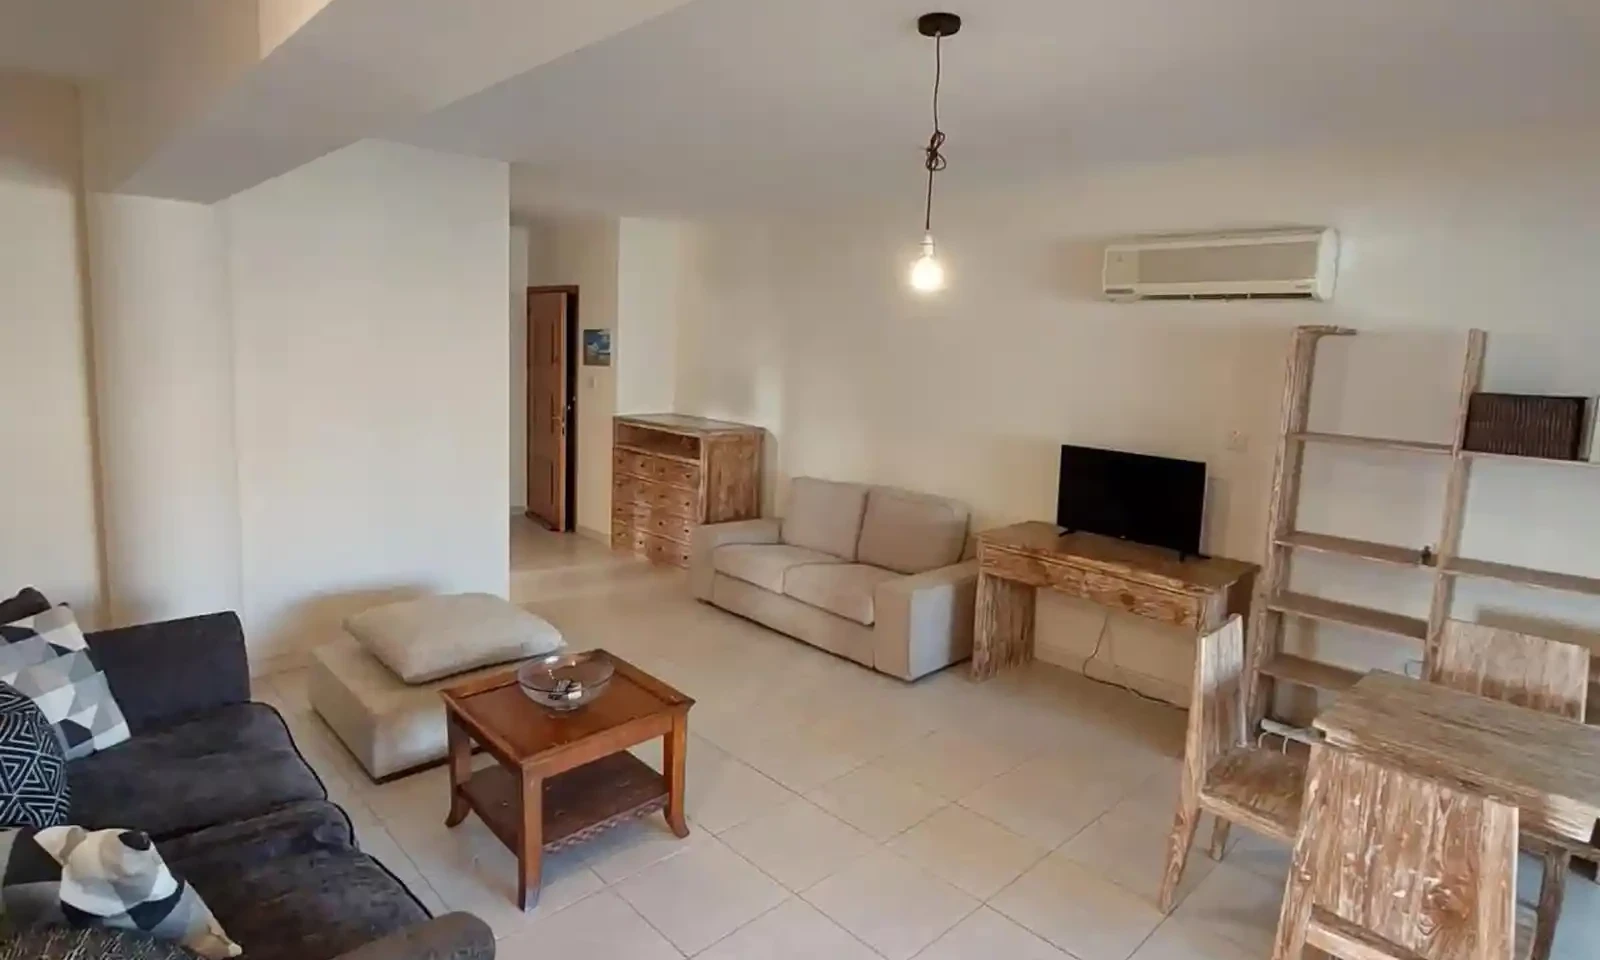 2-bedroom apartment fоr sаle €180.000, image 1